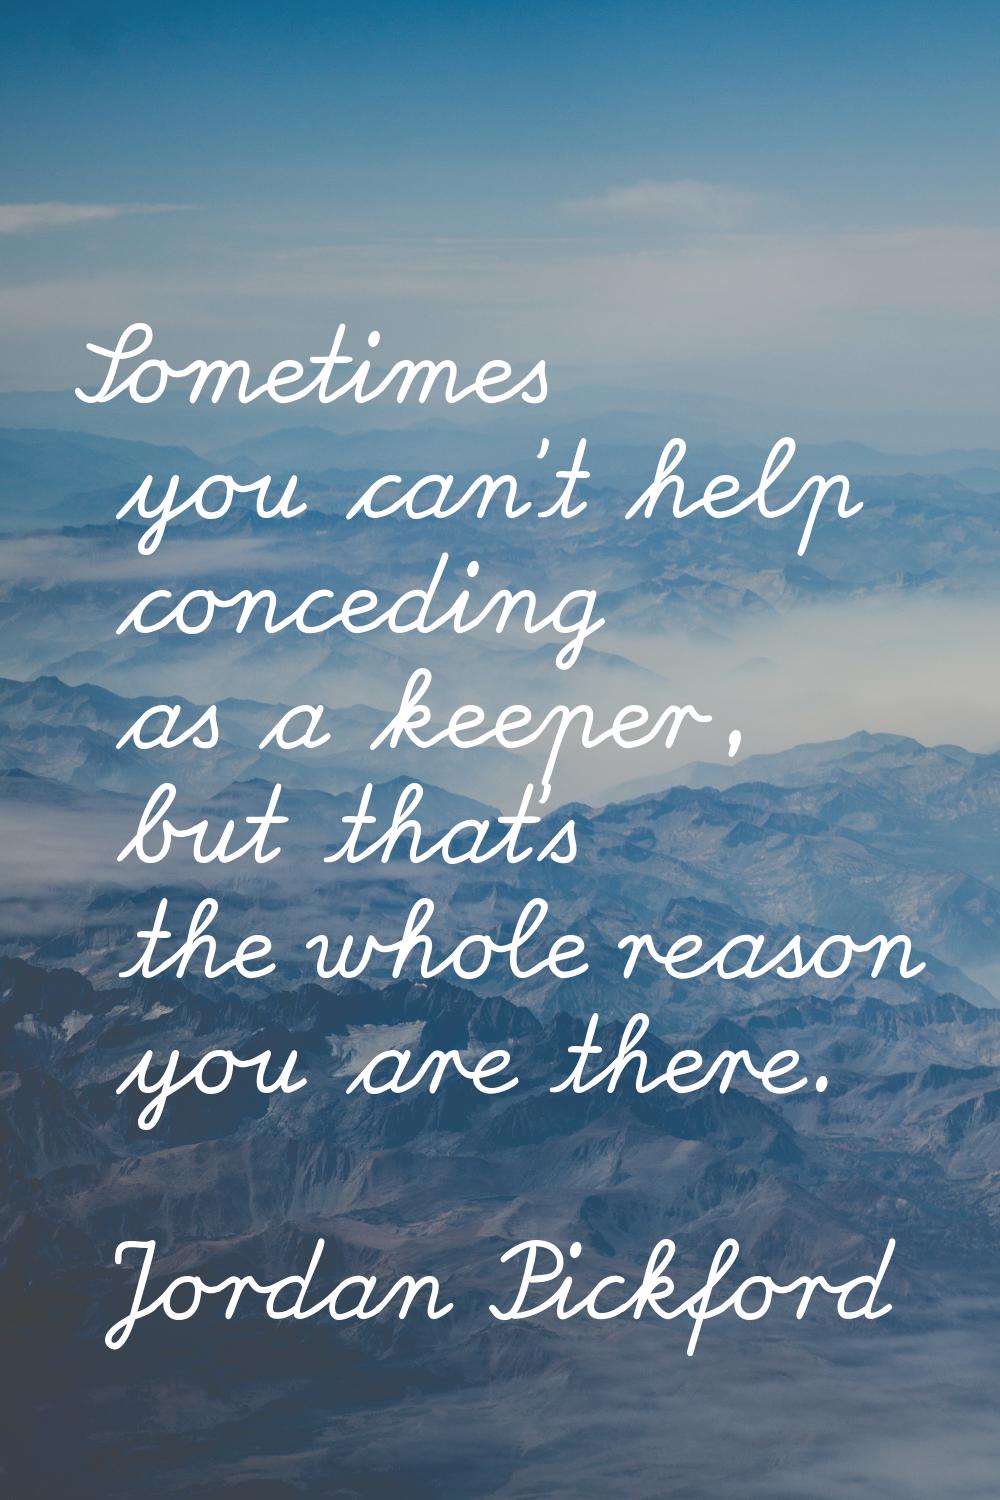 Sometimes you can't help conceding as a keeper, but that's the whole reason you are there.